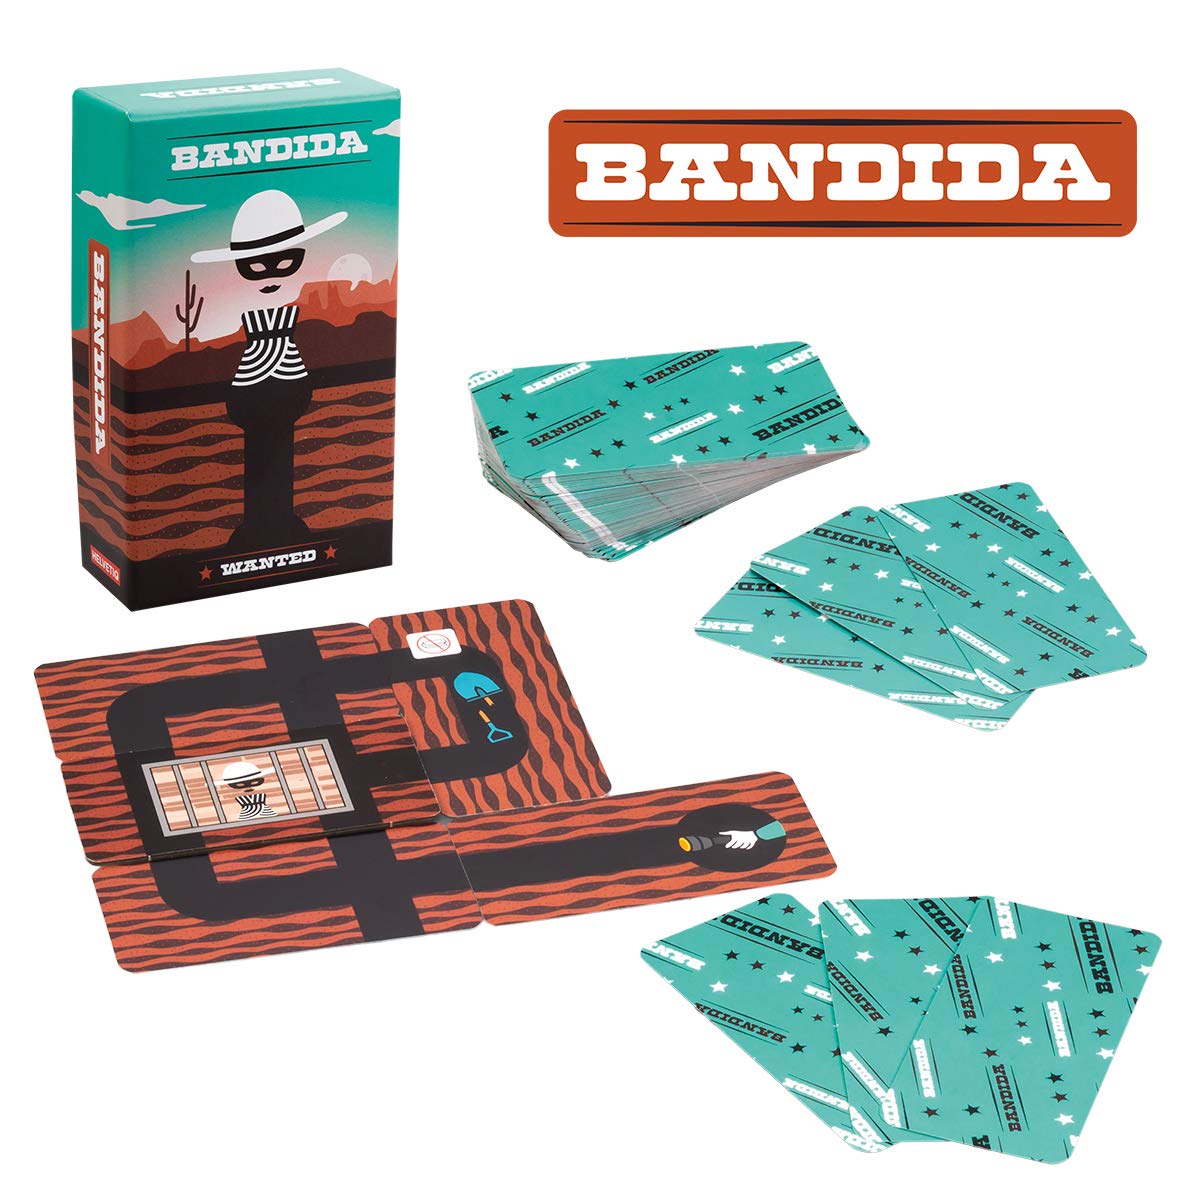 Helvetiq Bandida Card Game | Fun Strategy Game for Family Game Night | Cooperative Game for Adults and Kids | Ages 6+ | 1-4 Players | Average Playtime 15 Minutes | Made